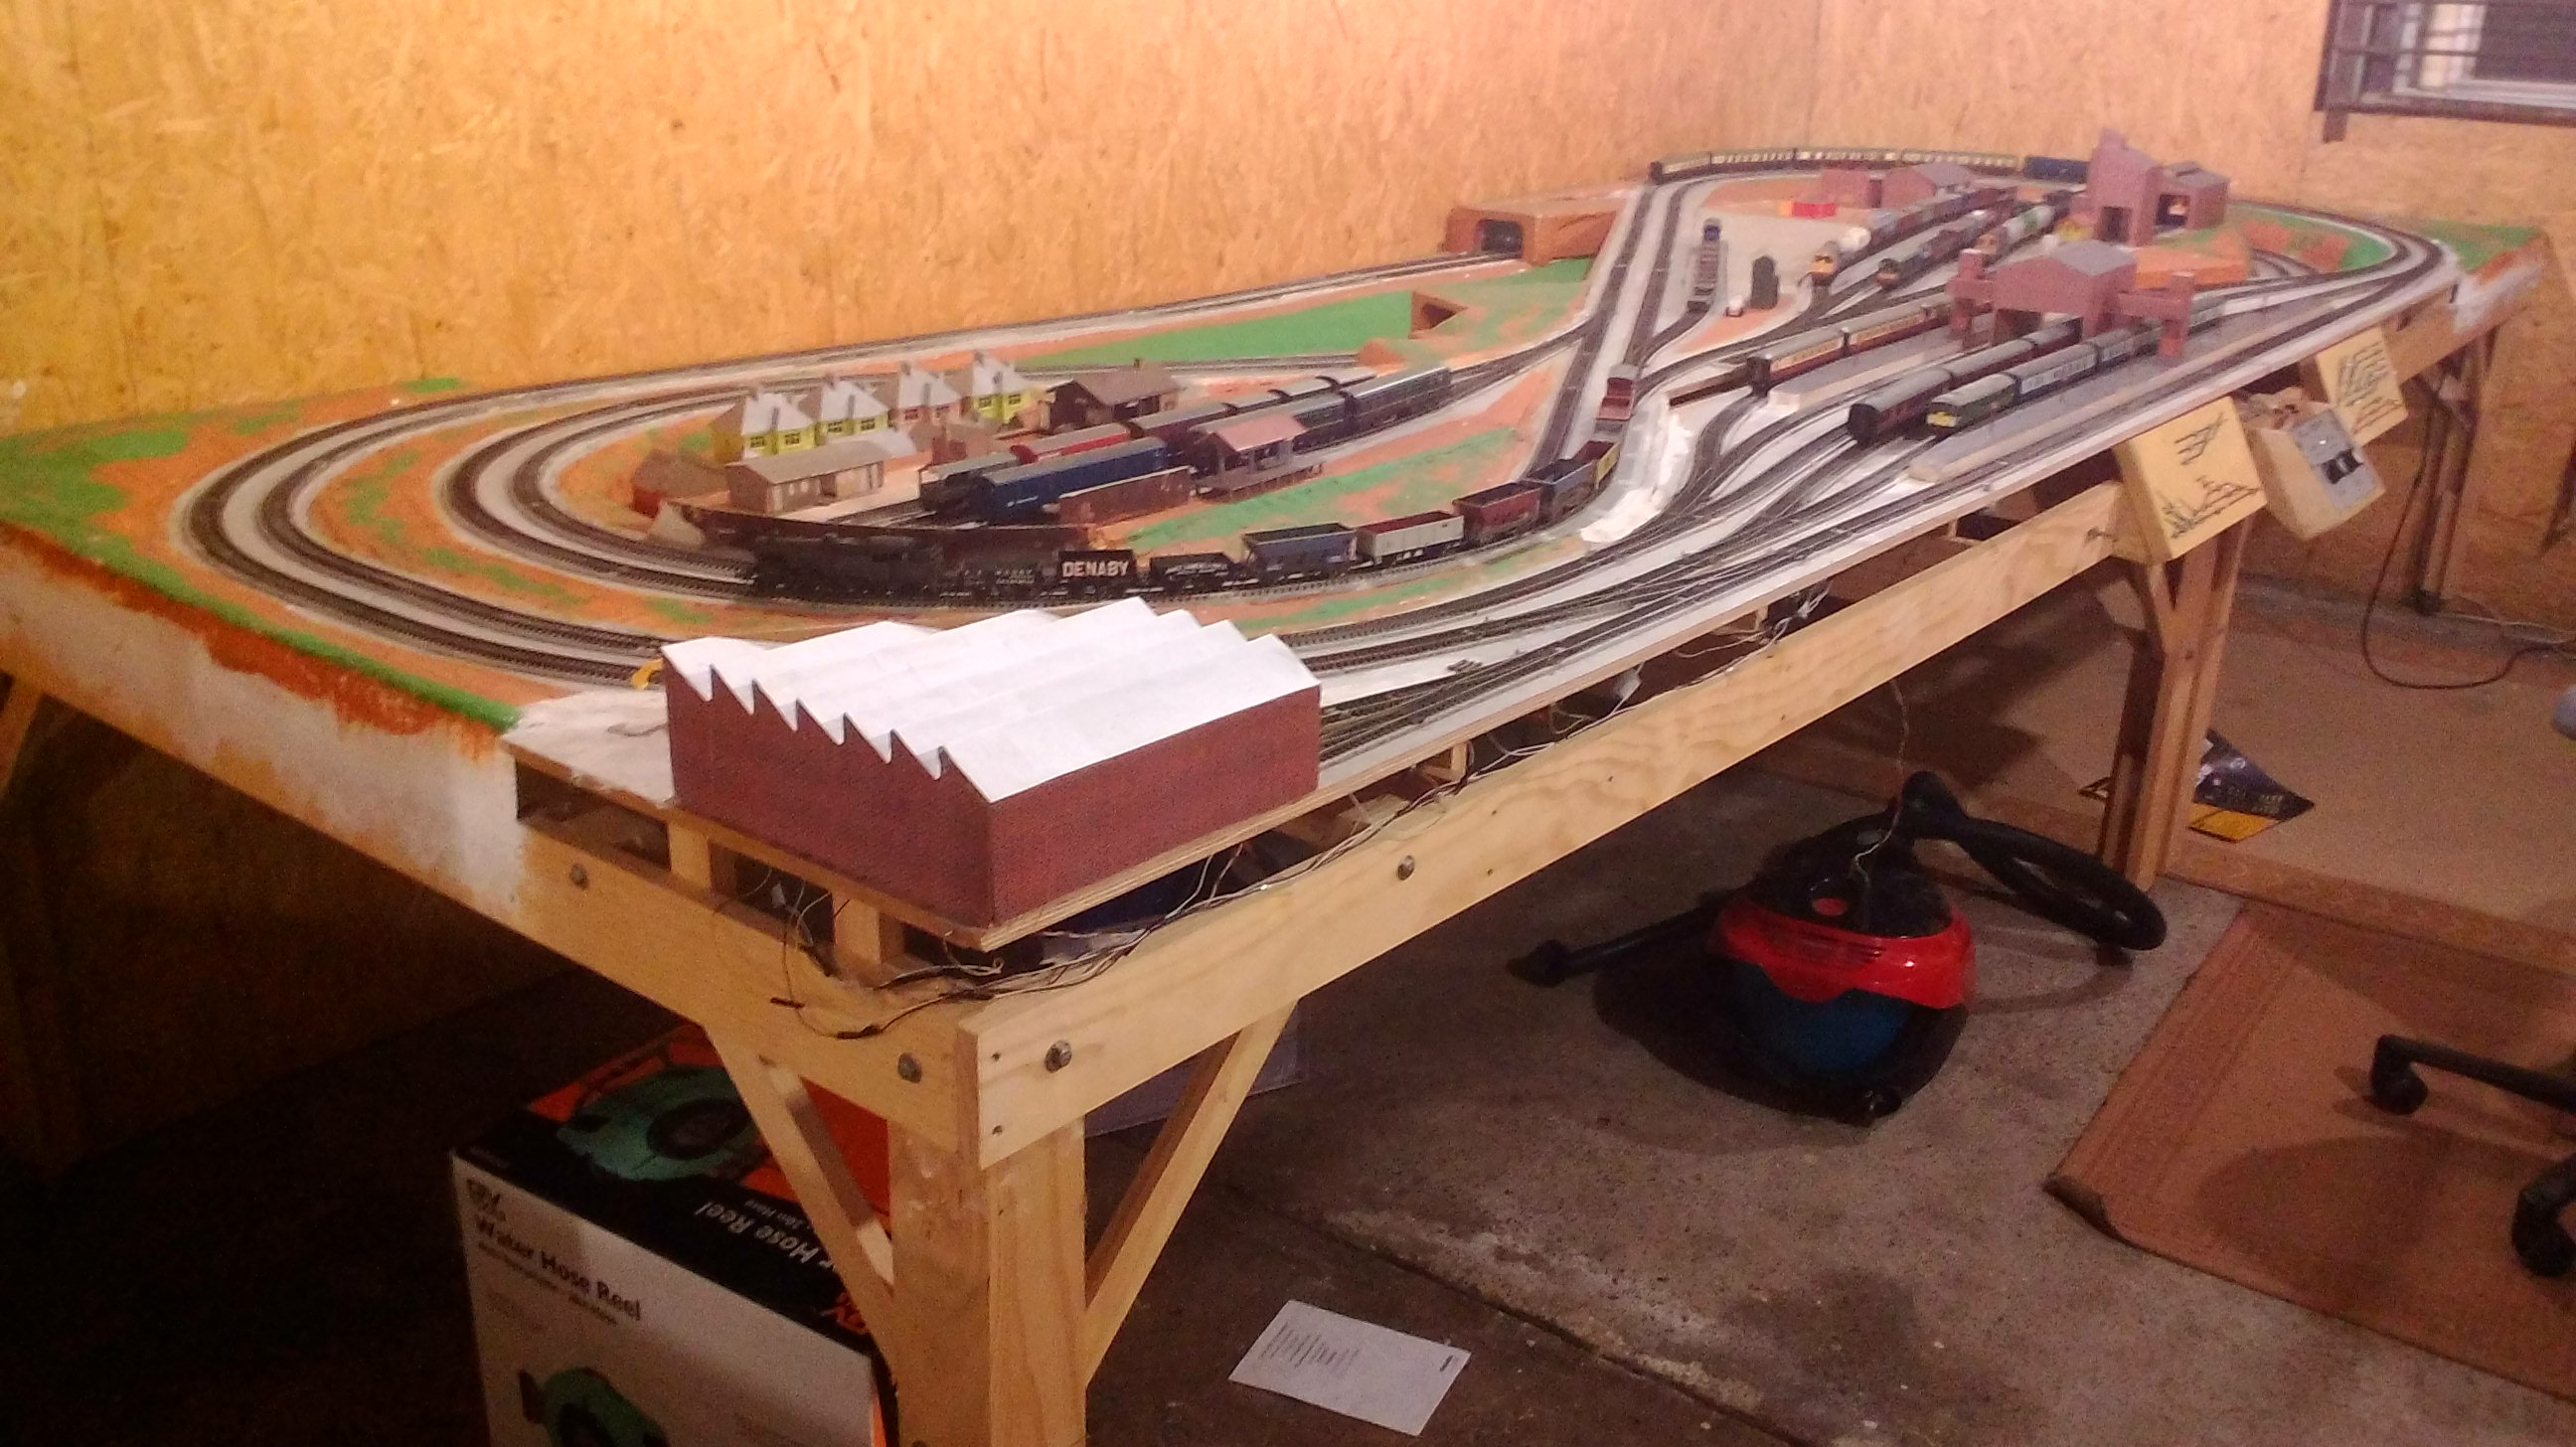 15ft x 6ft Layout Built In Two Sections - Model Train Help BlogModel